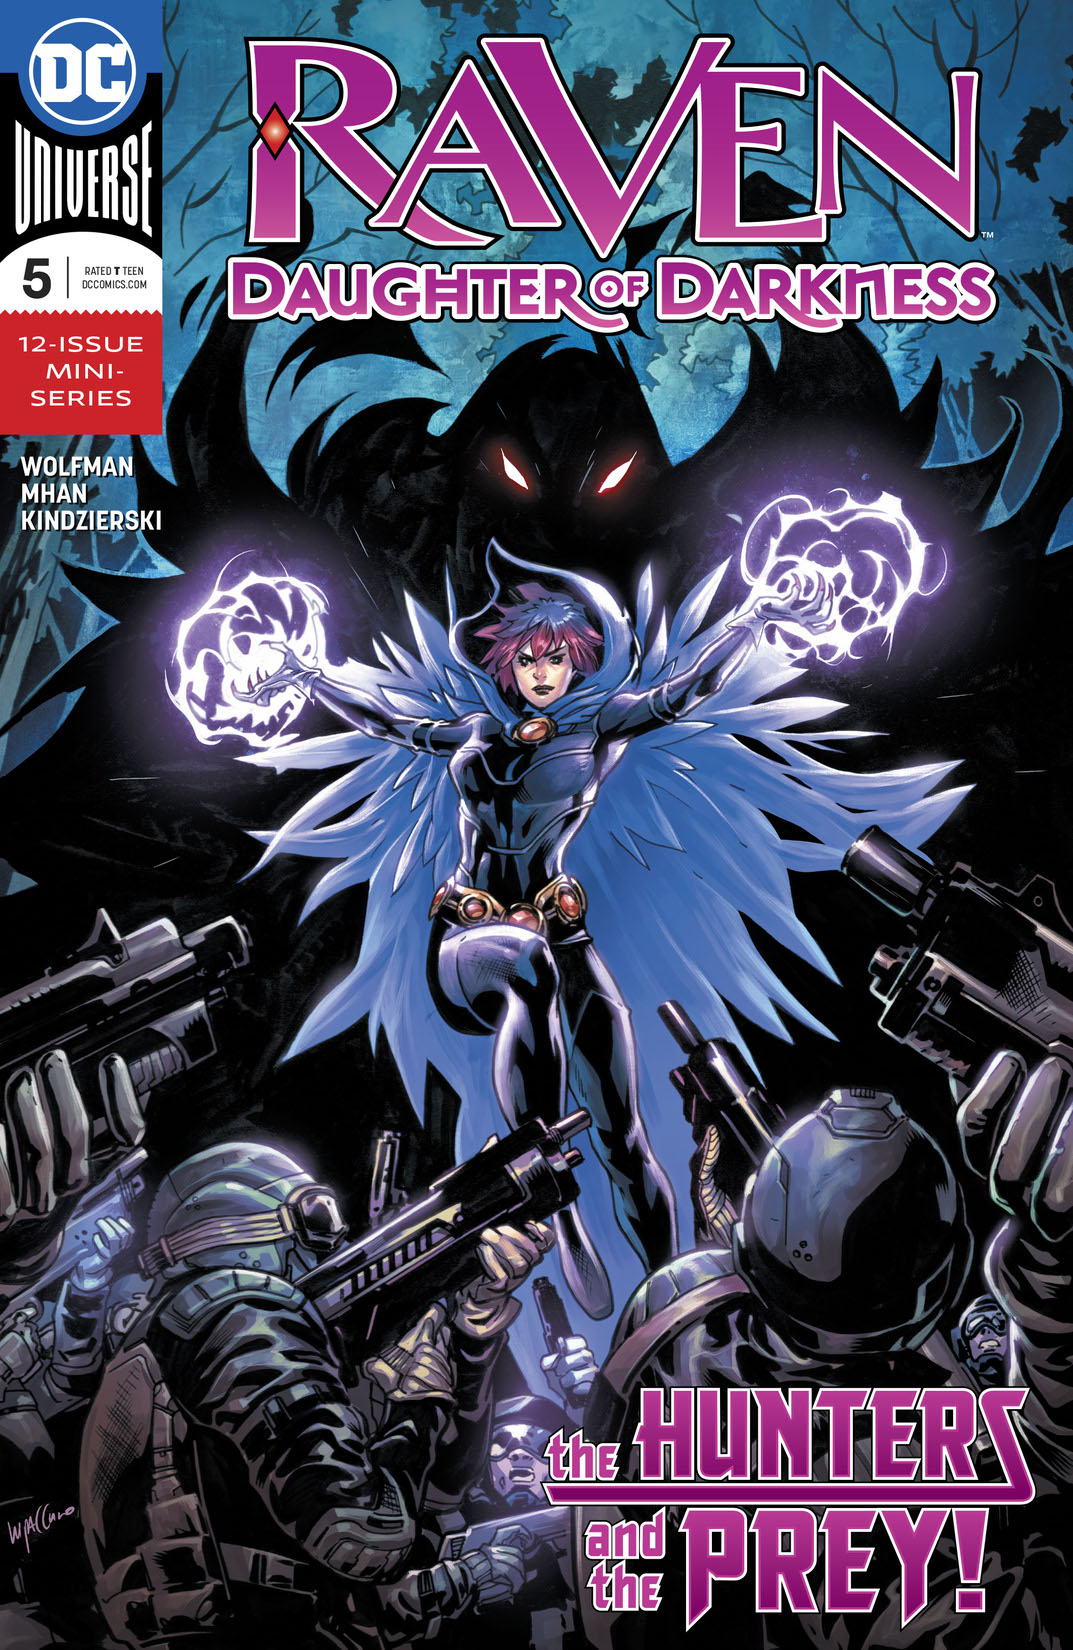 Raven: Daughter of Darkness #5 preview images